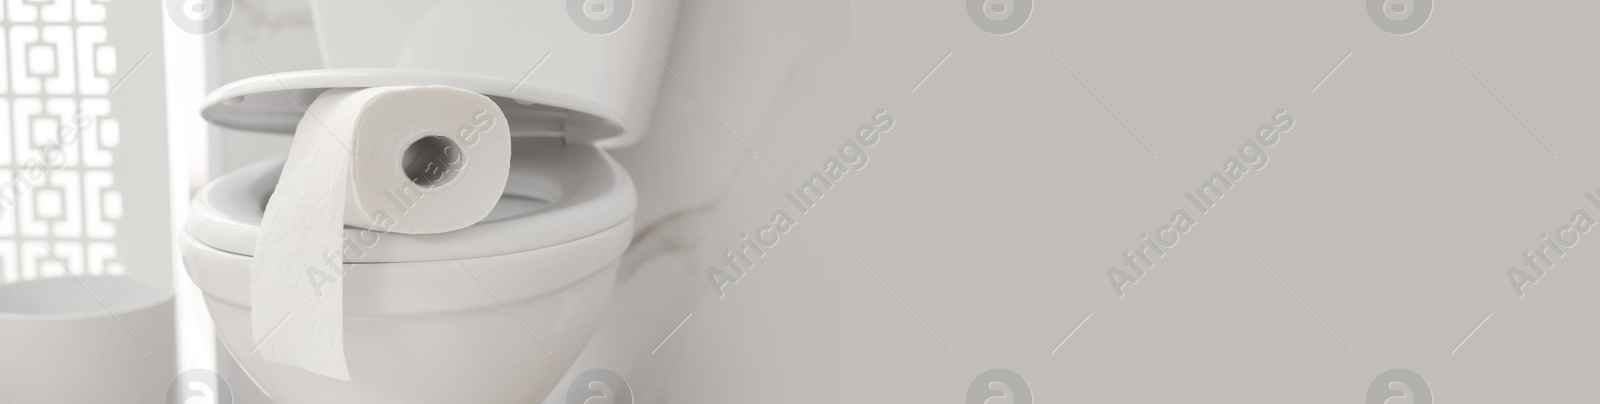 Image of Paper roll on toilet bowl in bathroom, space for text. Banner design